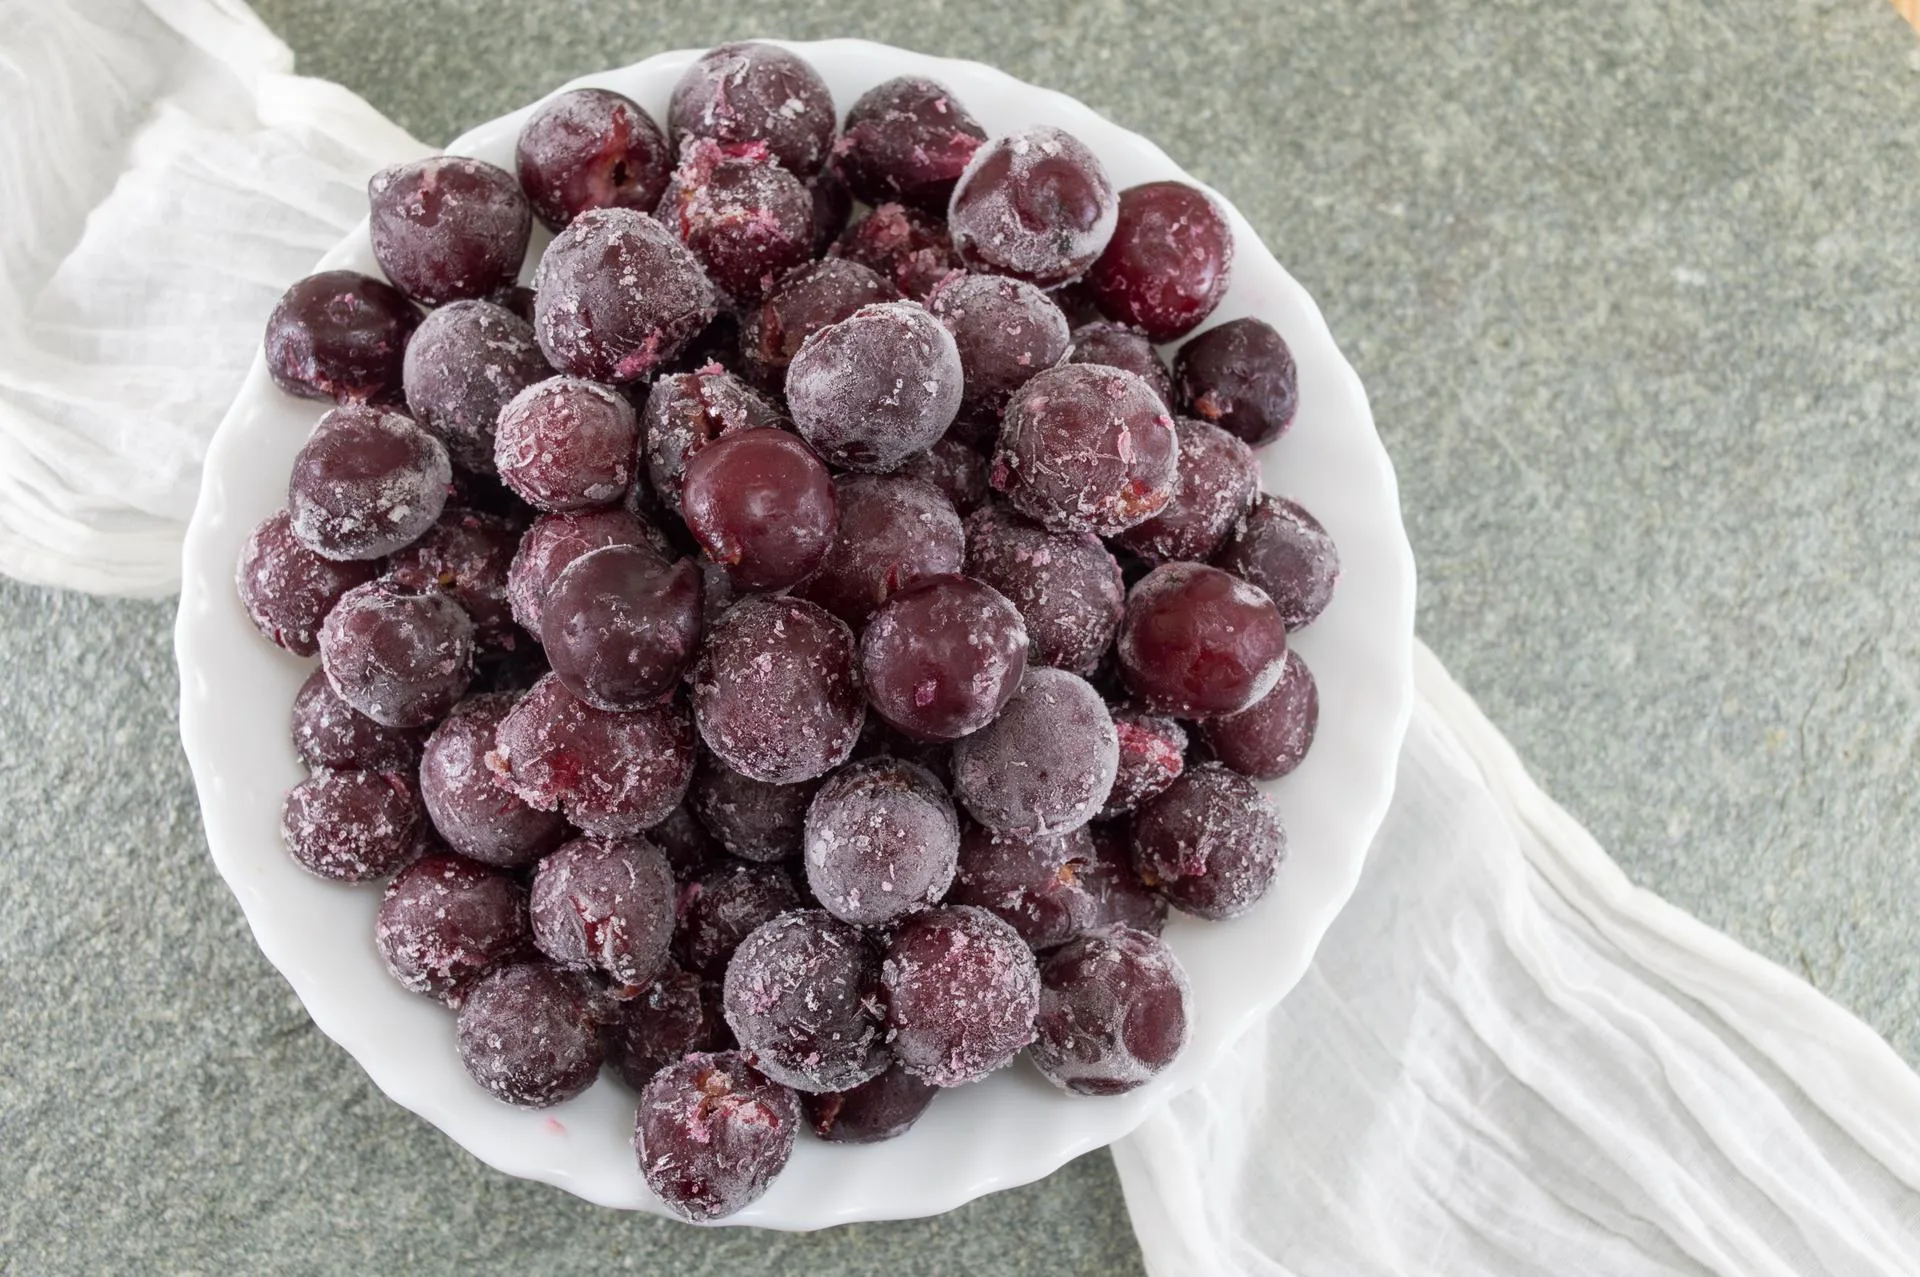 If you have a sweet tooth, grapes are often a go-to-favorite.